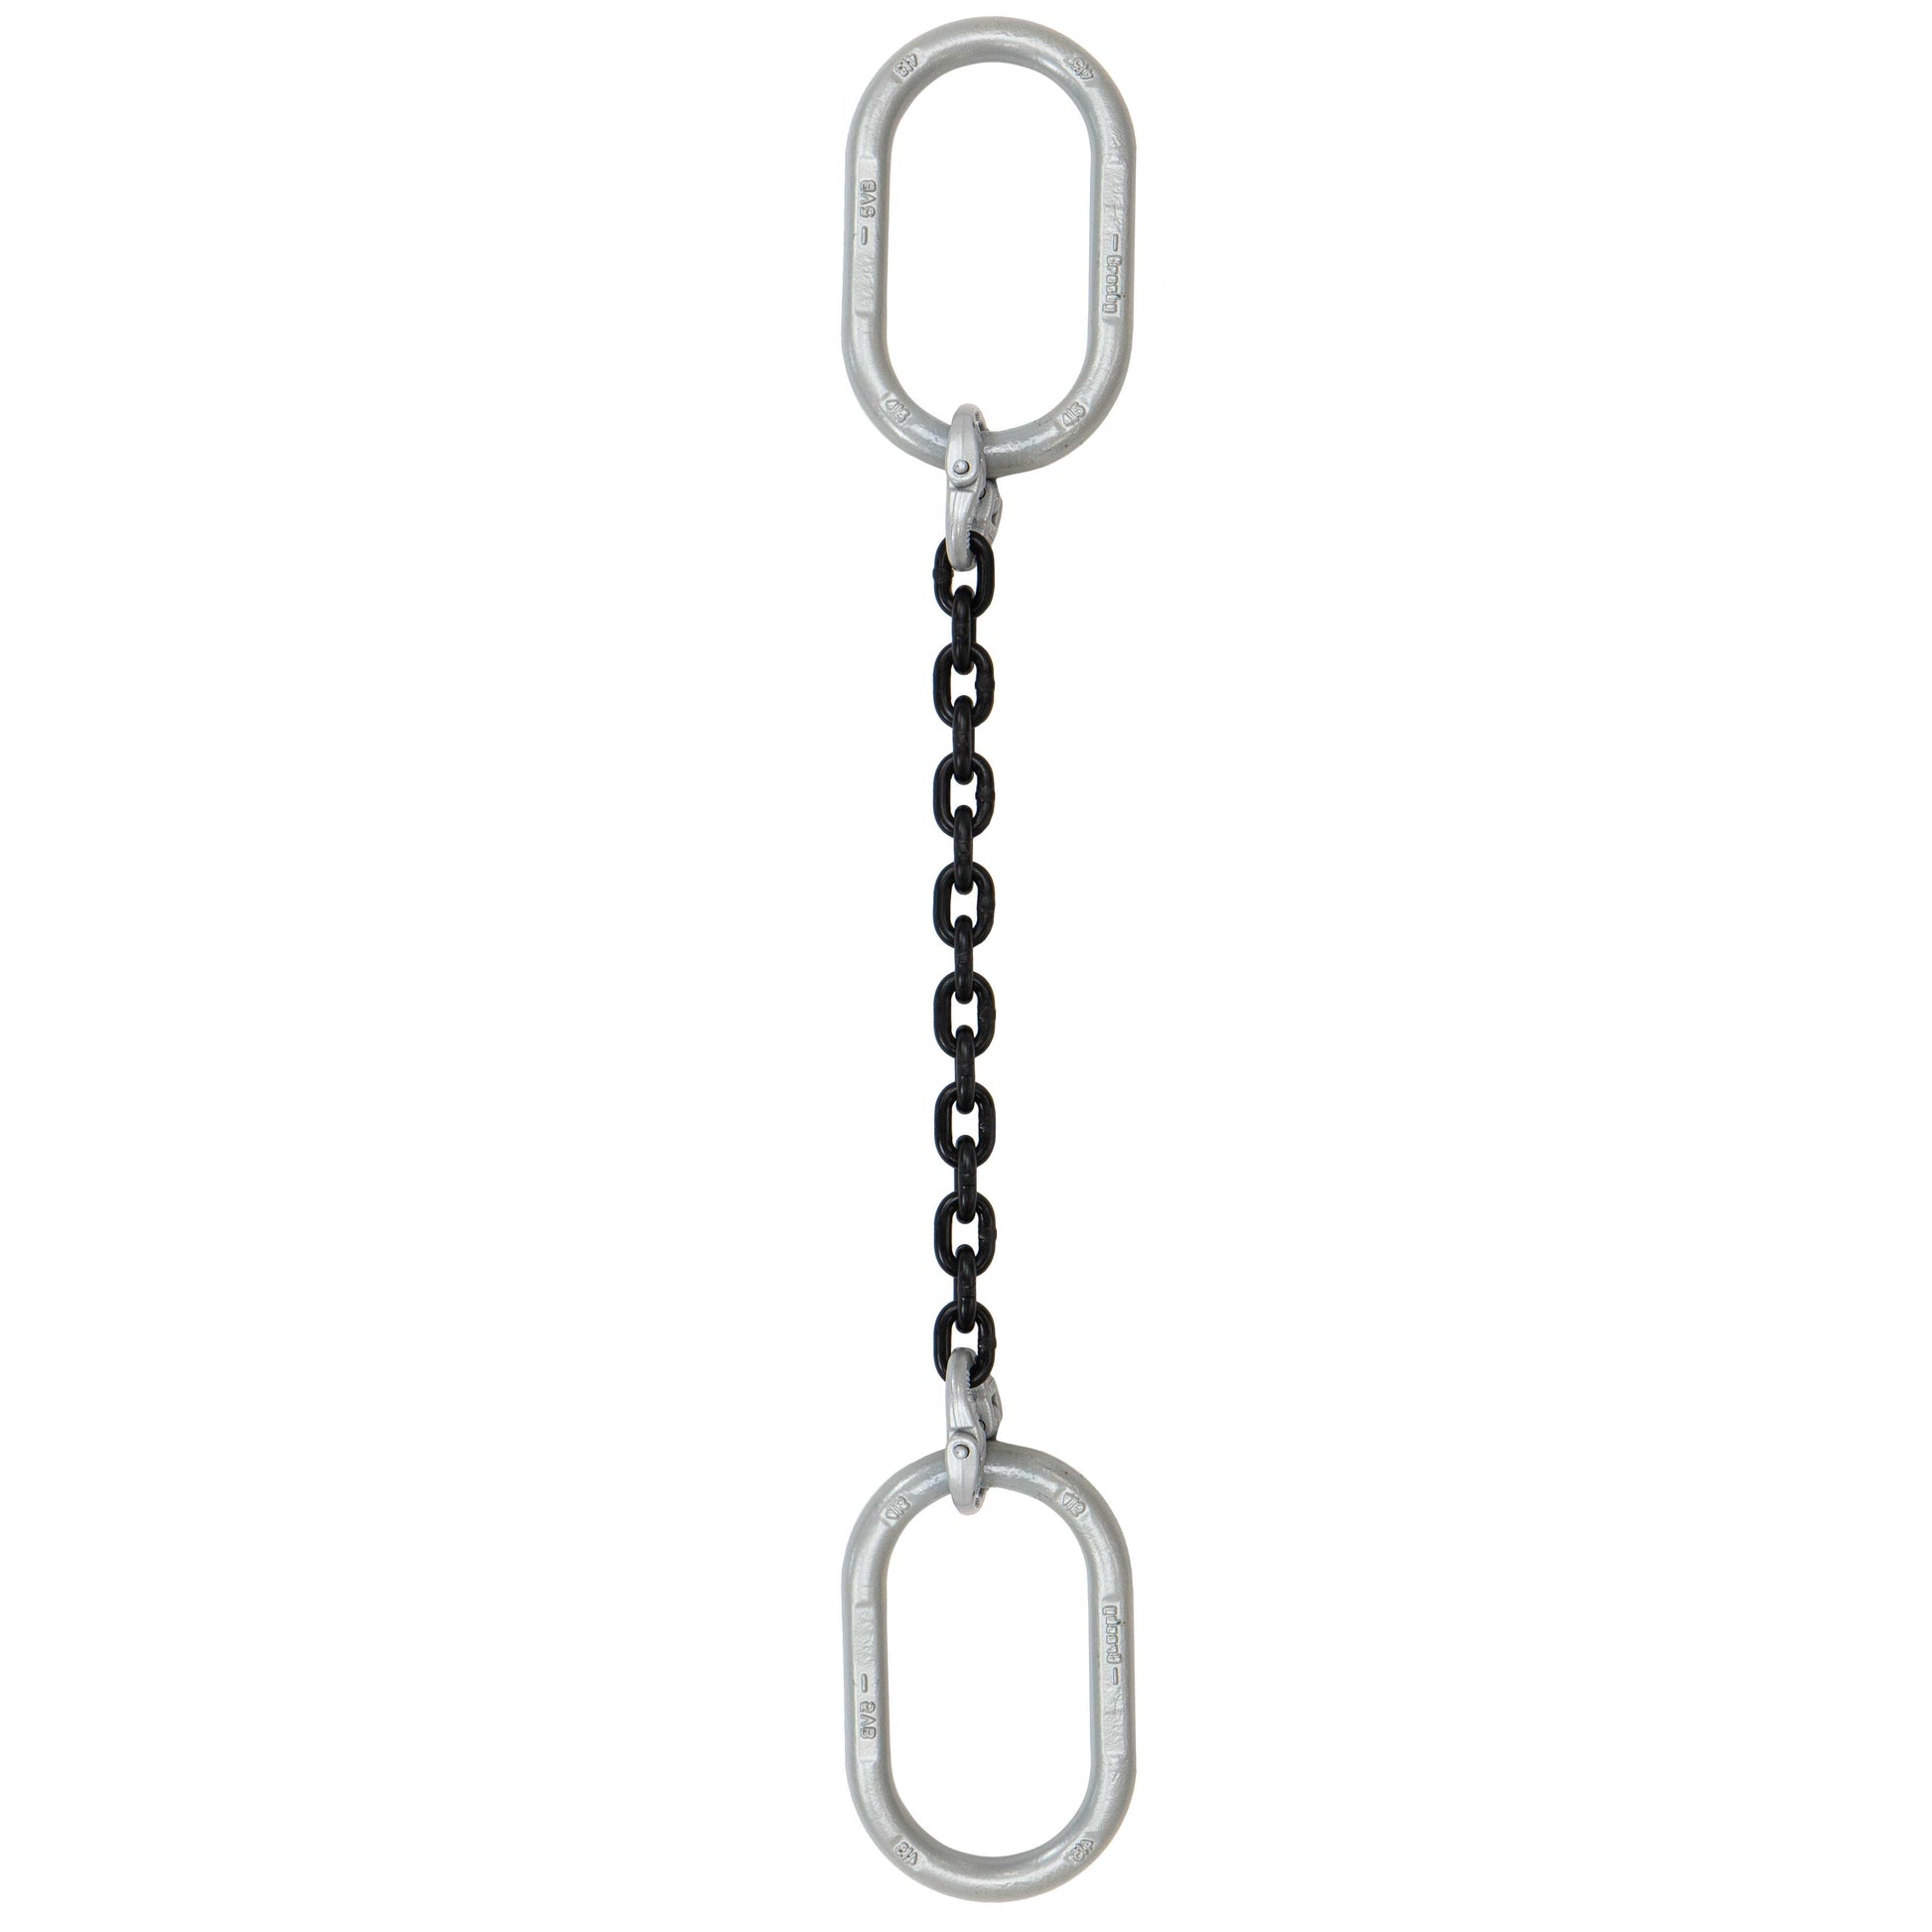 34 inch x 20 foot Crosby Single Leg Chain Sling w Oblong Master Links Grade 100 image 1 of 2